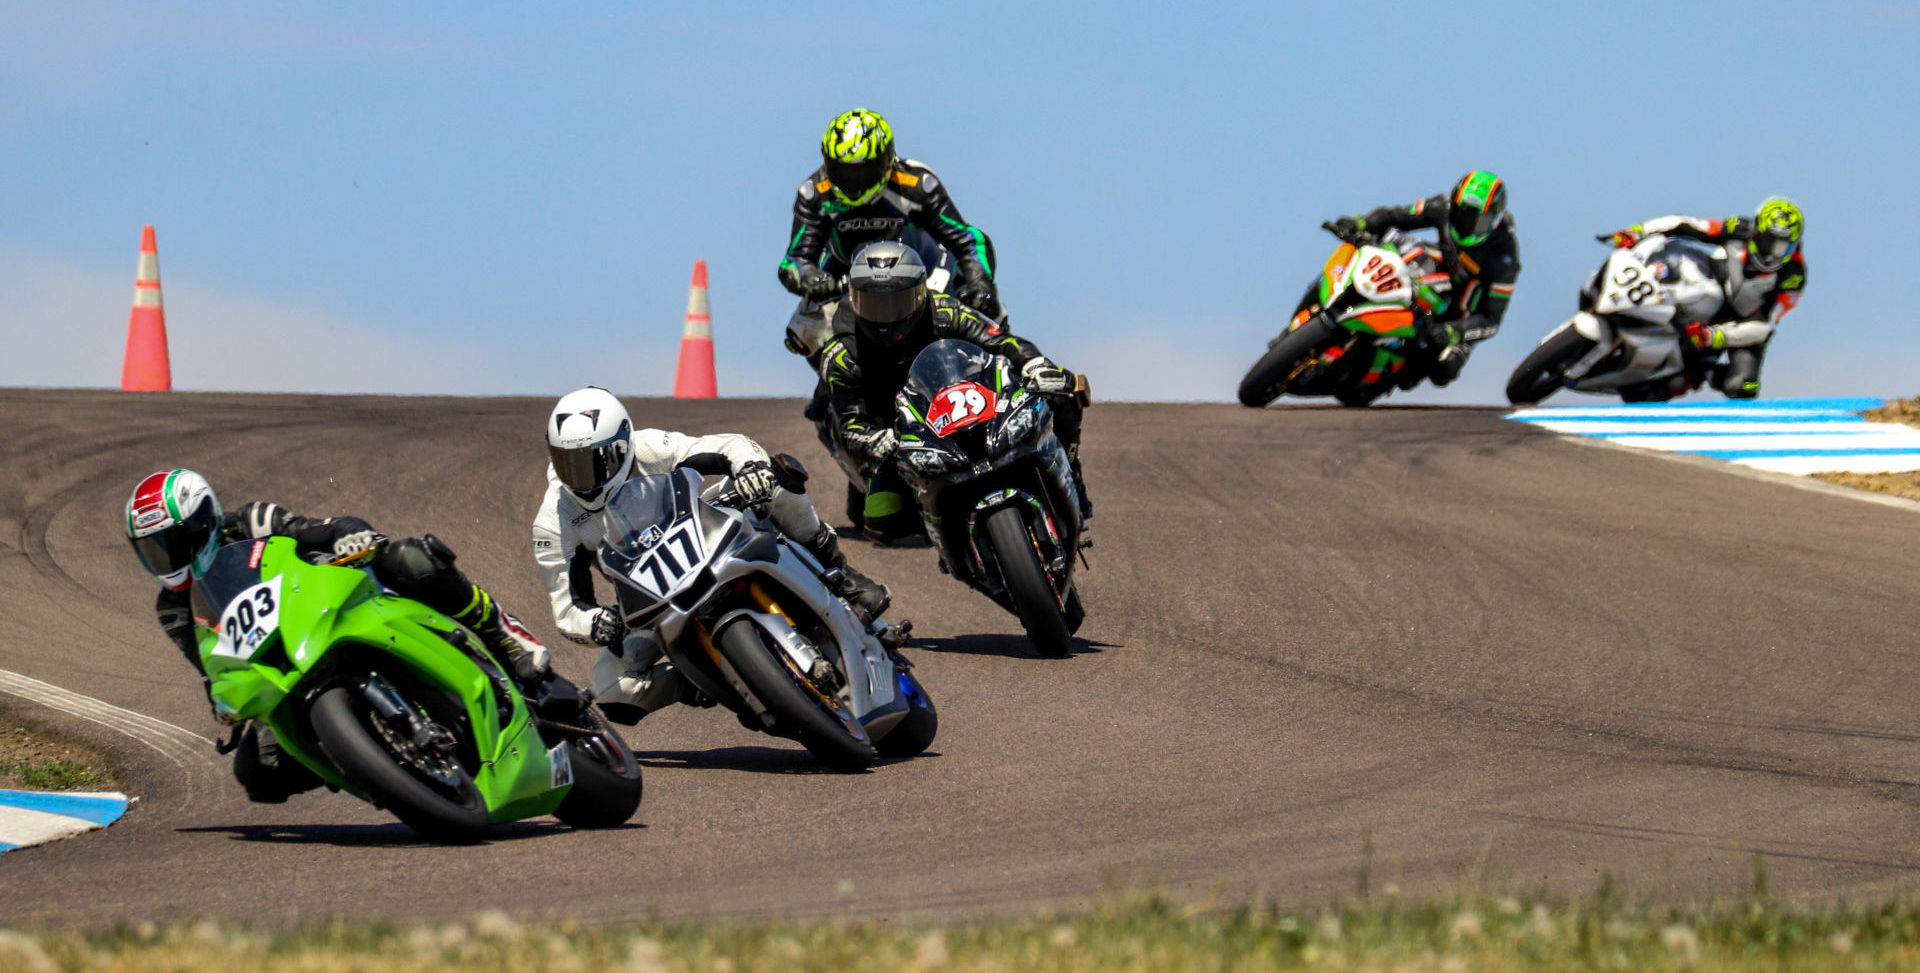 MRA racers in action during 2019. Photo by Sara Hunter, courtesy of MRA.